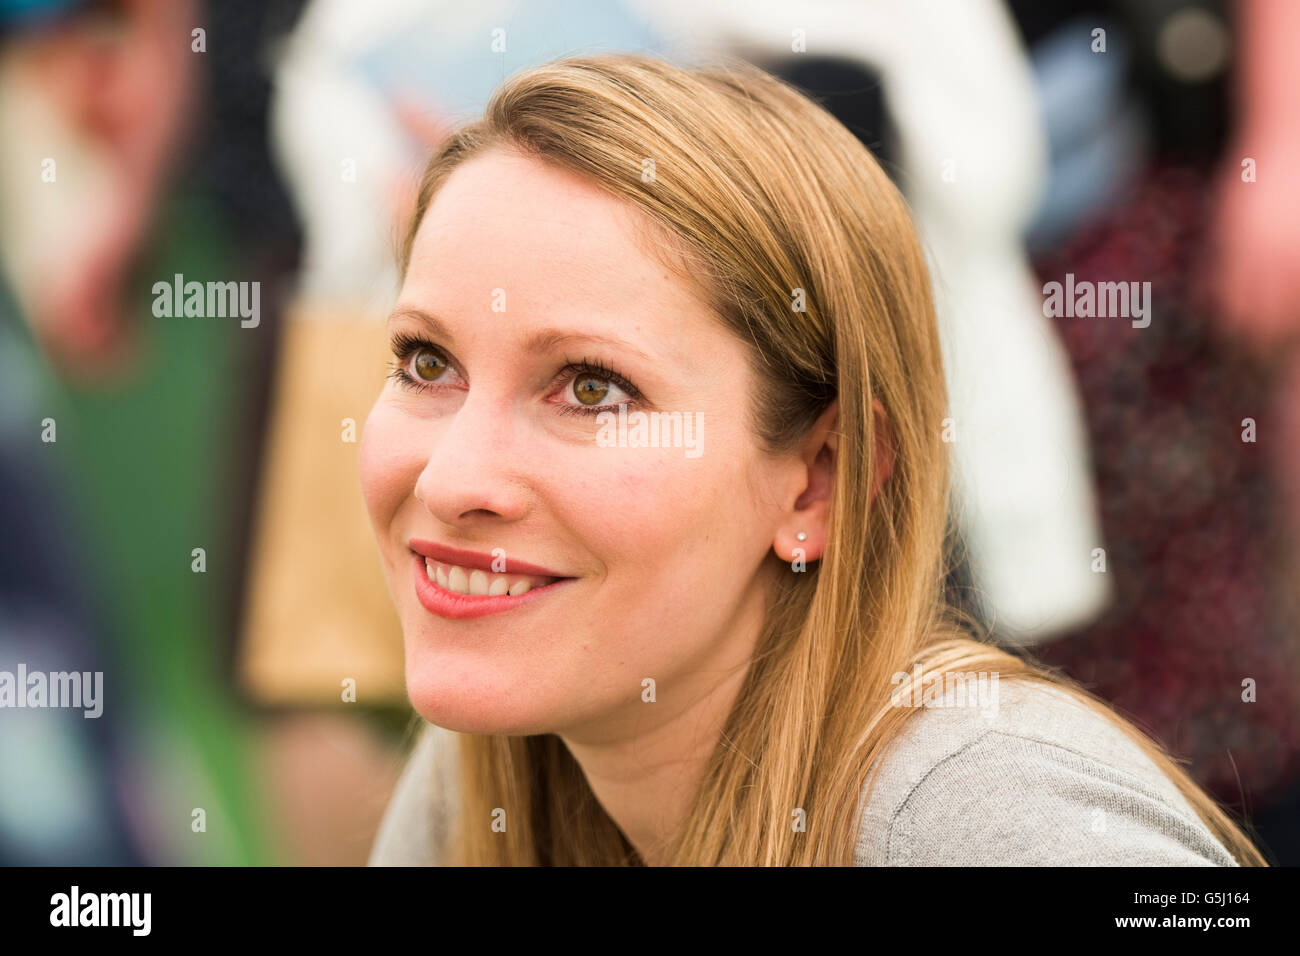 Laura Bates: British feminist writer. She founded the Everyday Sexism Project website in April 2012. Her first book, Everyday Sexism, was published in 2014  The Hay Festival of Literature and the Arts, Hay on Wye, Powys, Wales UK, June 03 2016 Stock Photo